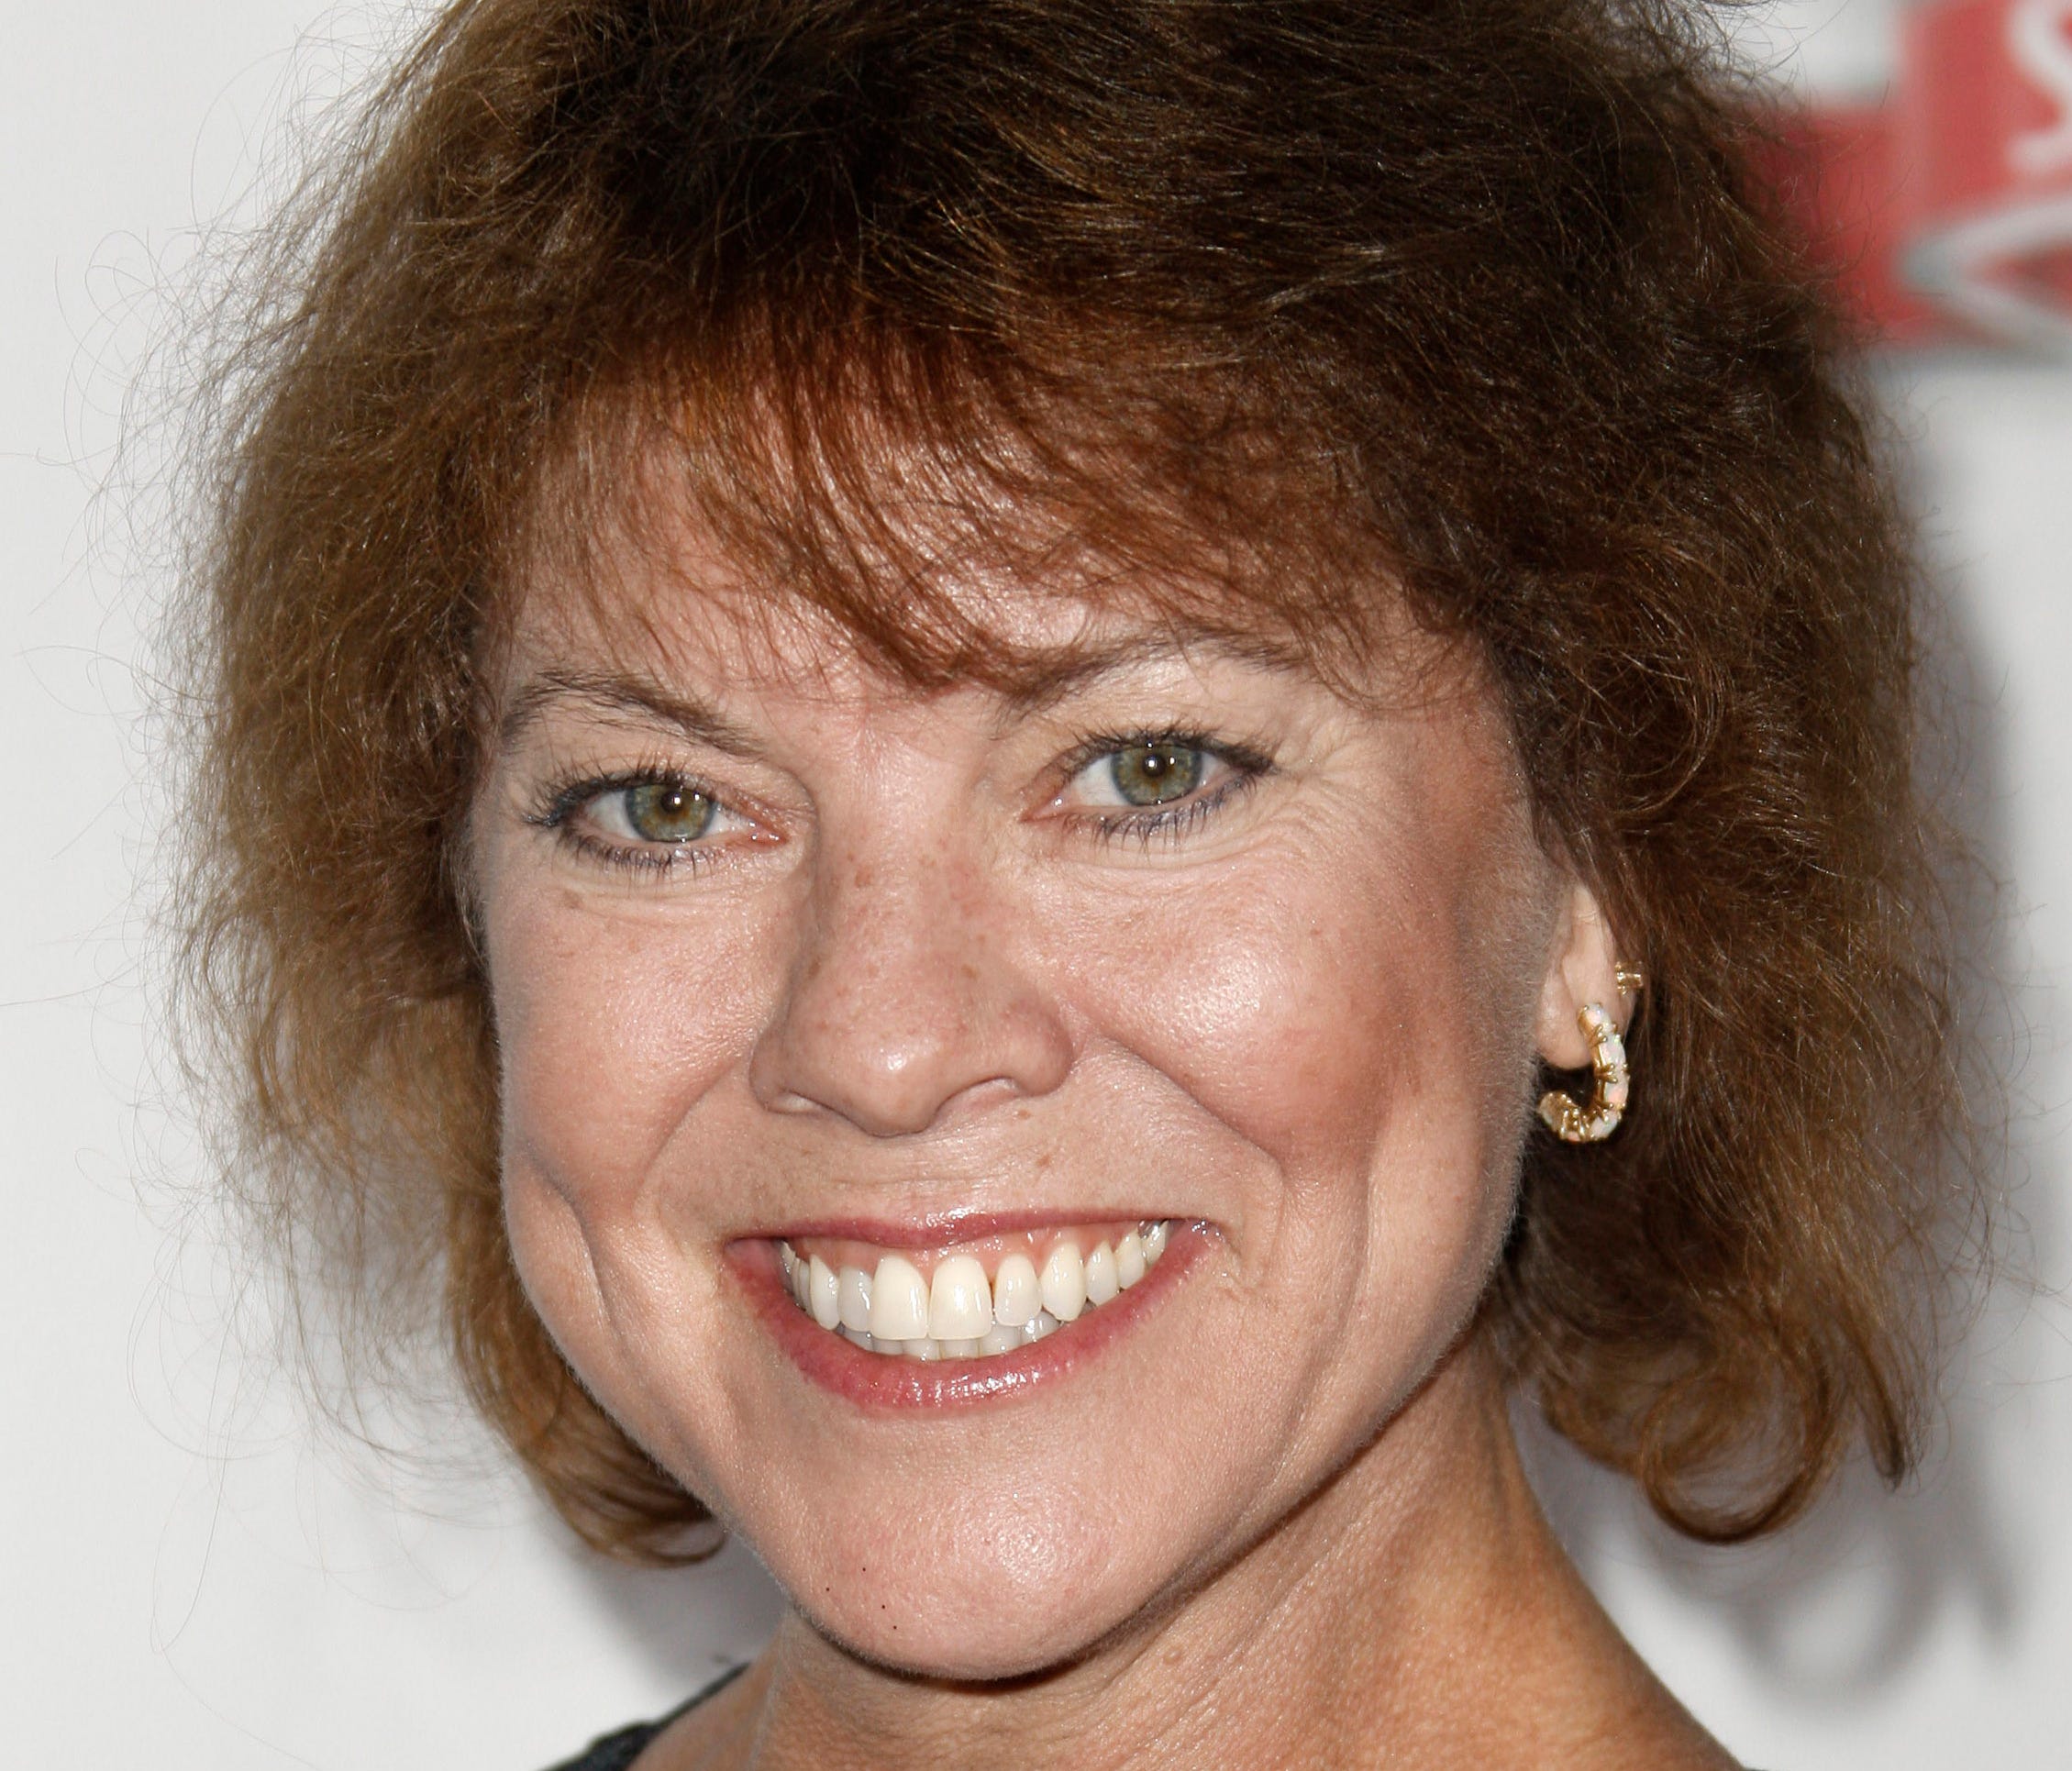 Actress Erin Moran died Saturday in Harrison County, Ind., after police said she had been found unresponsive. She as 56.